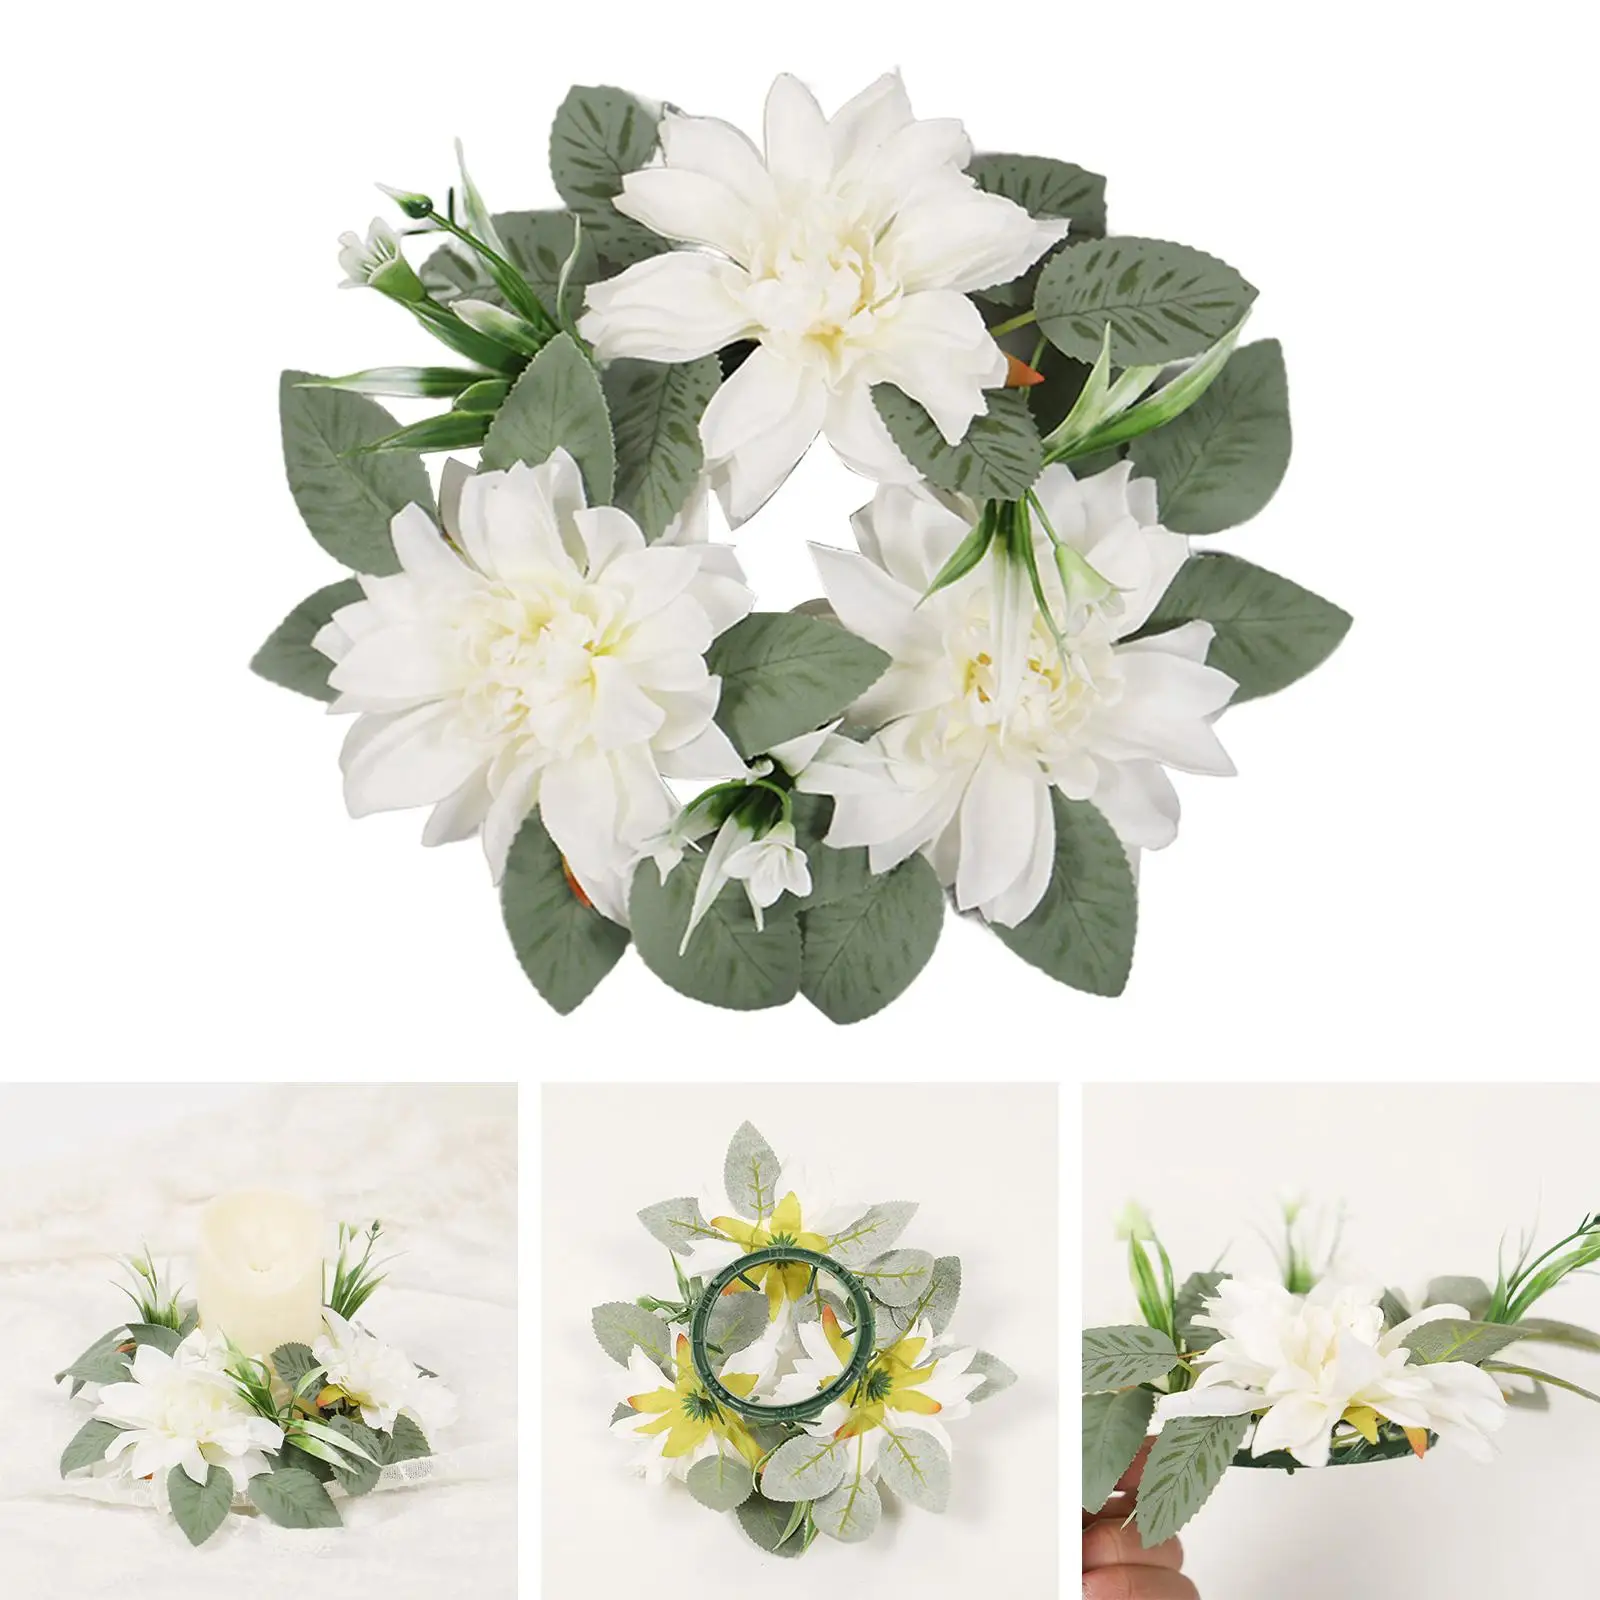 Artificial Flower Wreath Wedding Wreath Candle Ring 20cm Table Centerpiece Wreath Front Door Ornament for Festival